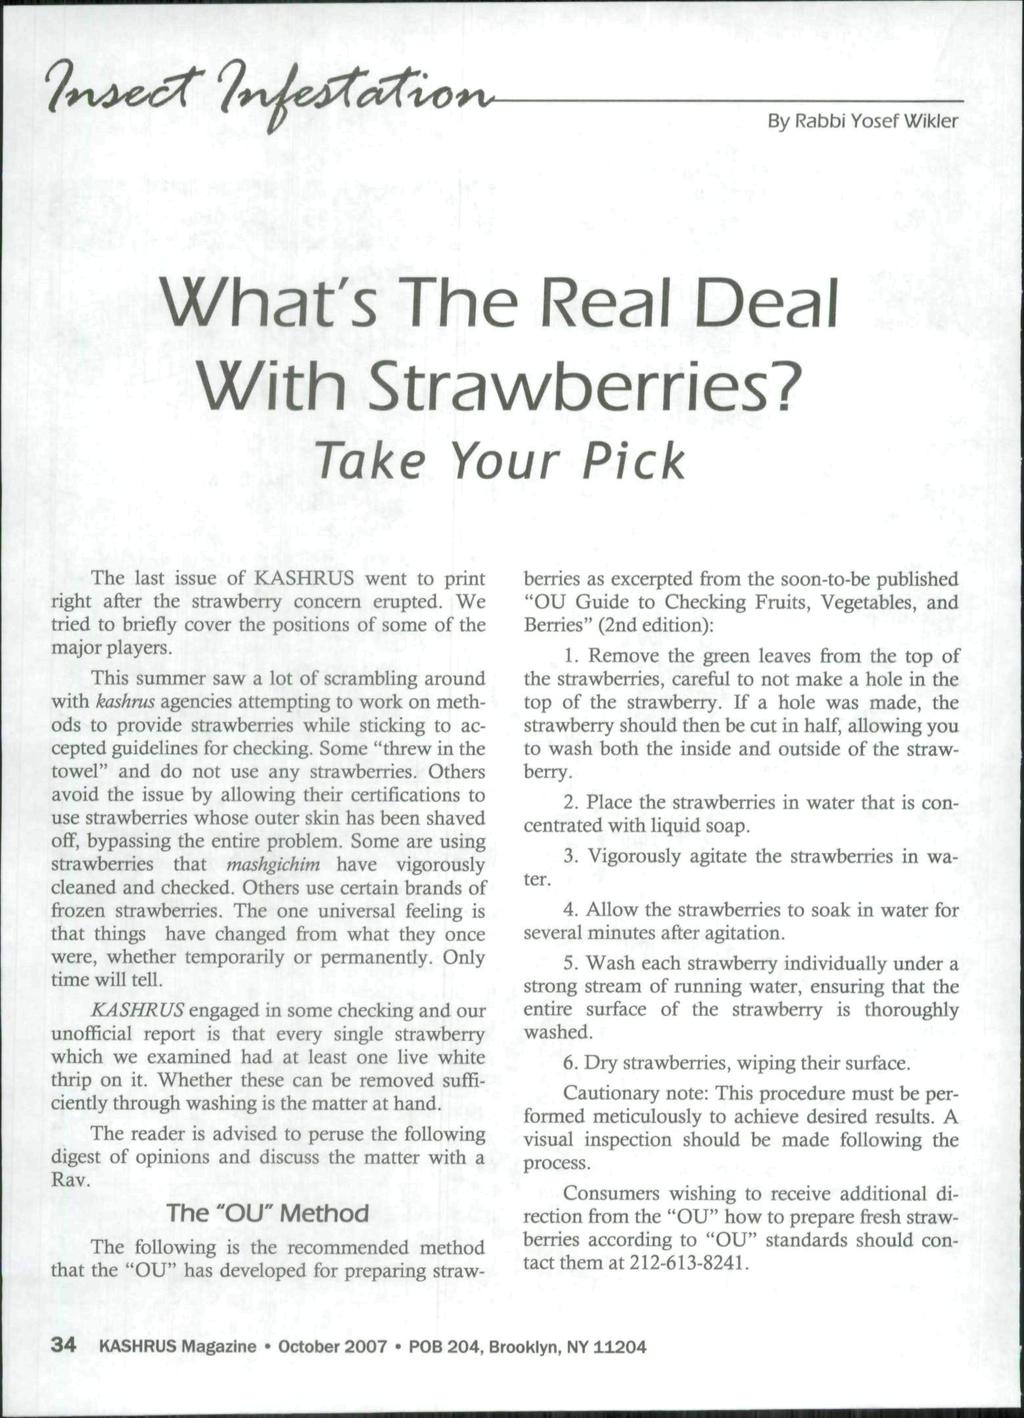 />X<* ^M By Rabbi Yosef Wikler What's The Real Deal With Strawberries? Take Your Pick The last issue of KASHRUS went to print right after the strawberry concern erupted.